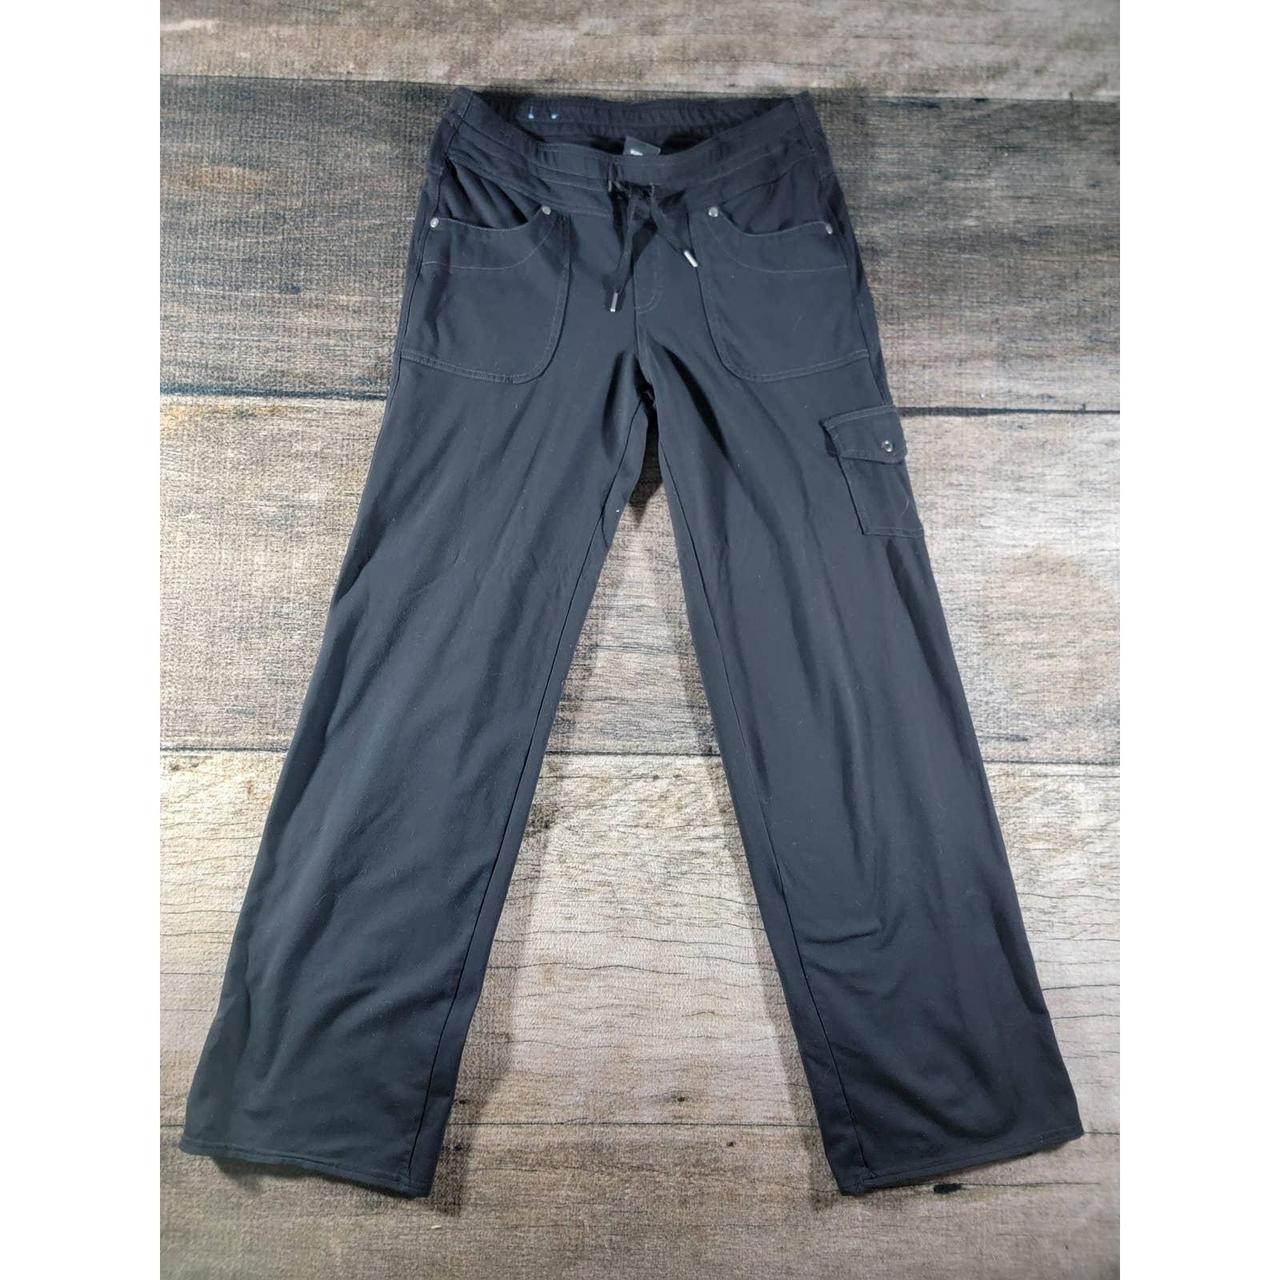 KUHL Womens Mova Pants Short Relaxed Fit Gray. SIze - Depop